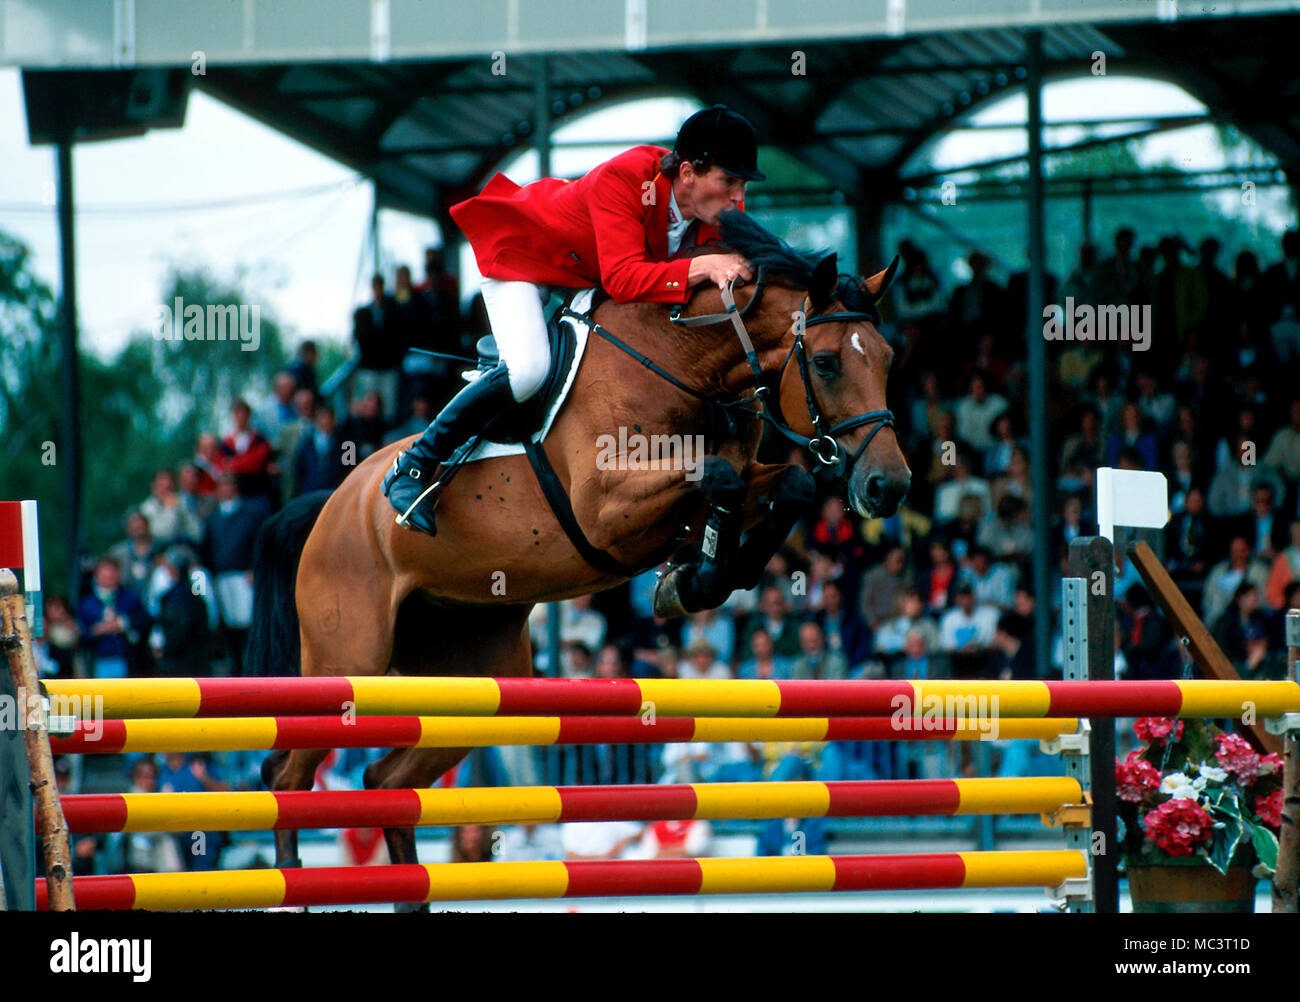 CHIO Aachen June 1996, Ludger Beerbaum (GER) riding Sprehe Ratina Z Stock Photo